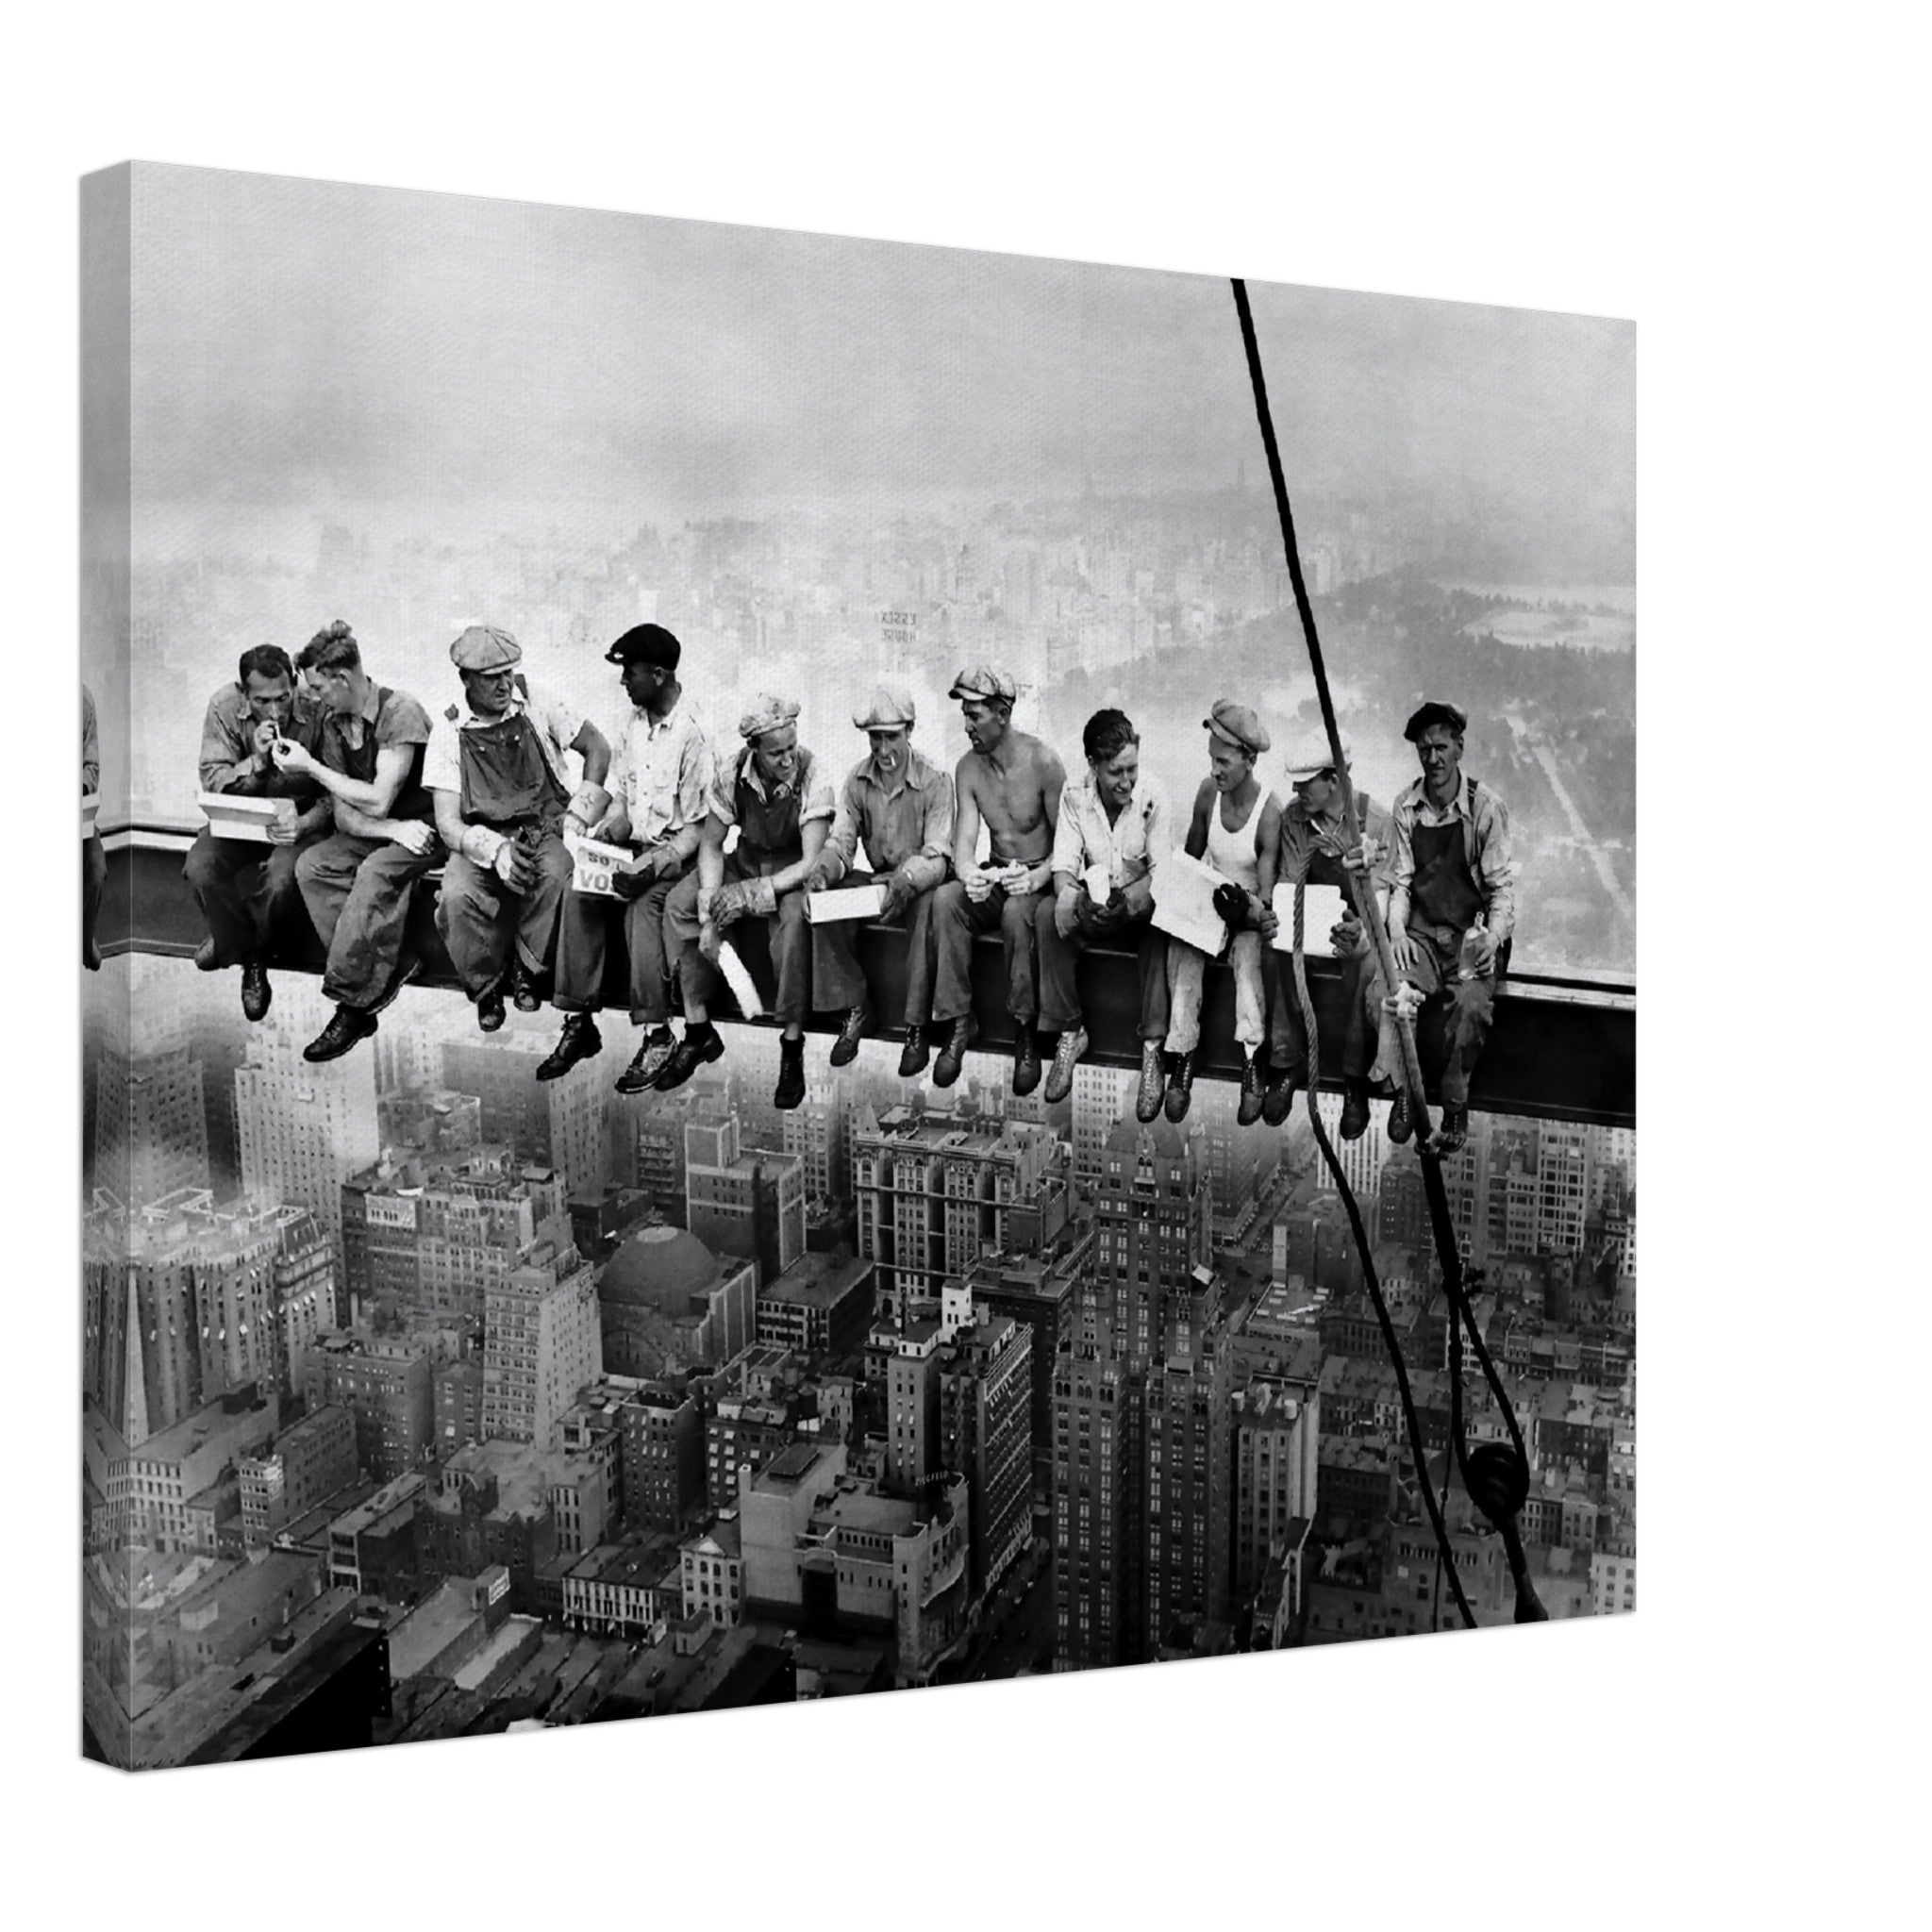 Lunch Atop A Skyscraper Canvas Print, Lunch On A Beam, Vintage Canvas From 1932 New York Construction Workers, - WallArtPrints4U